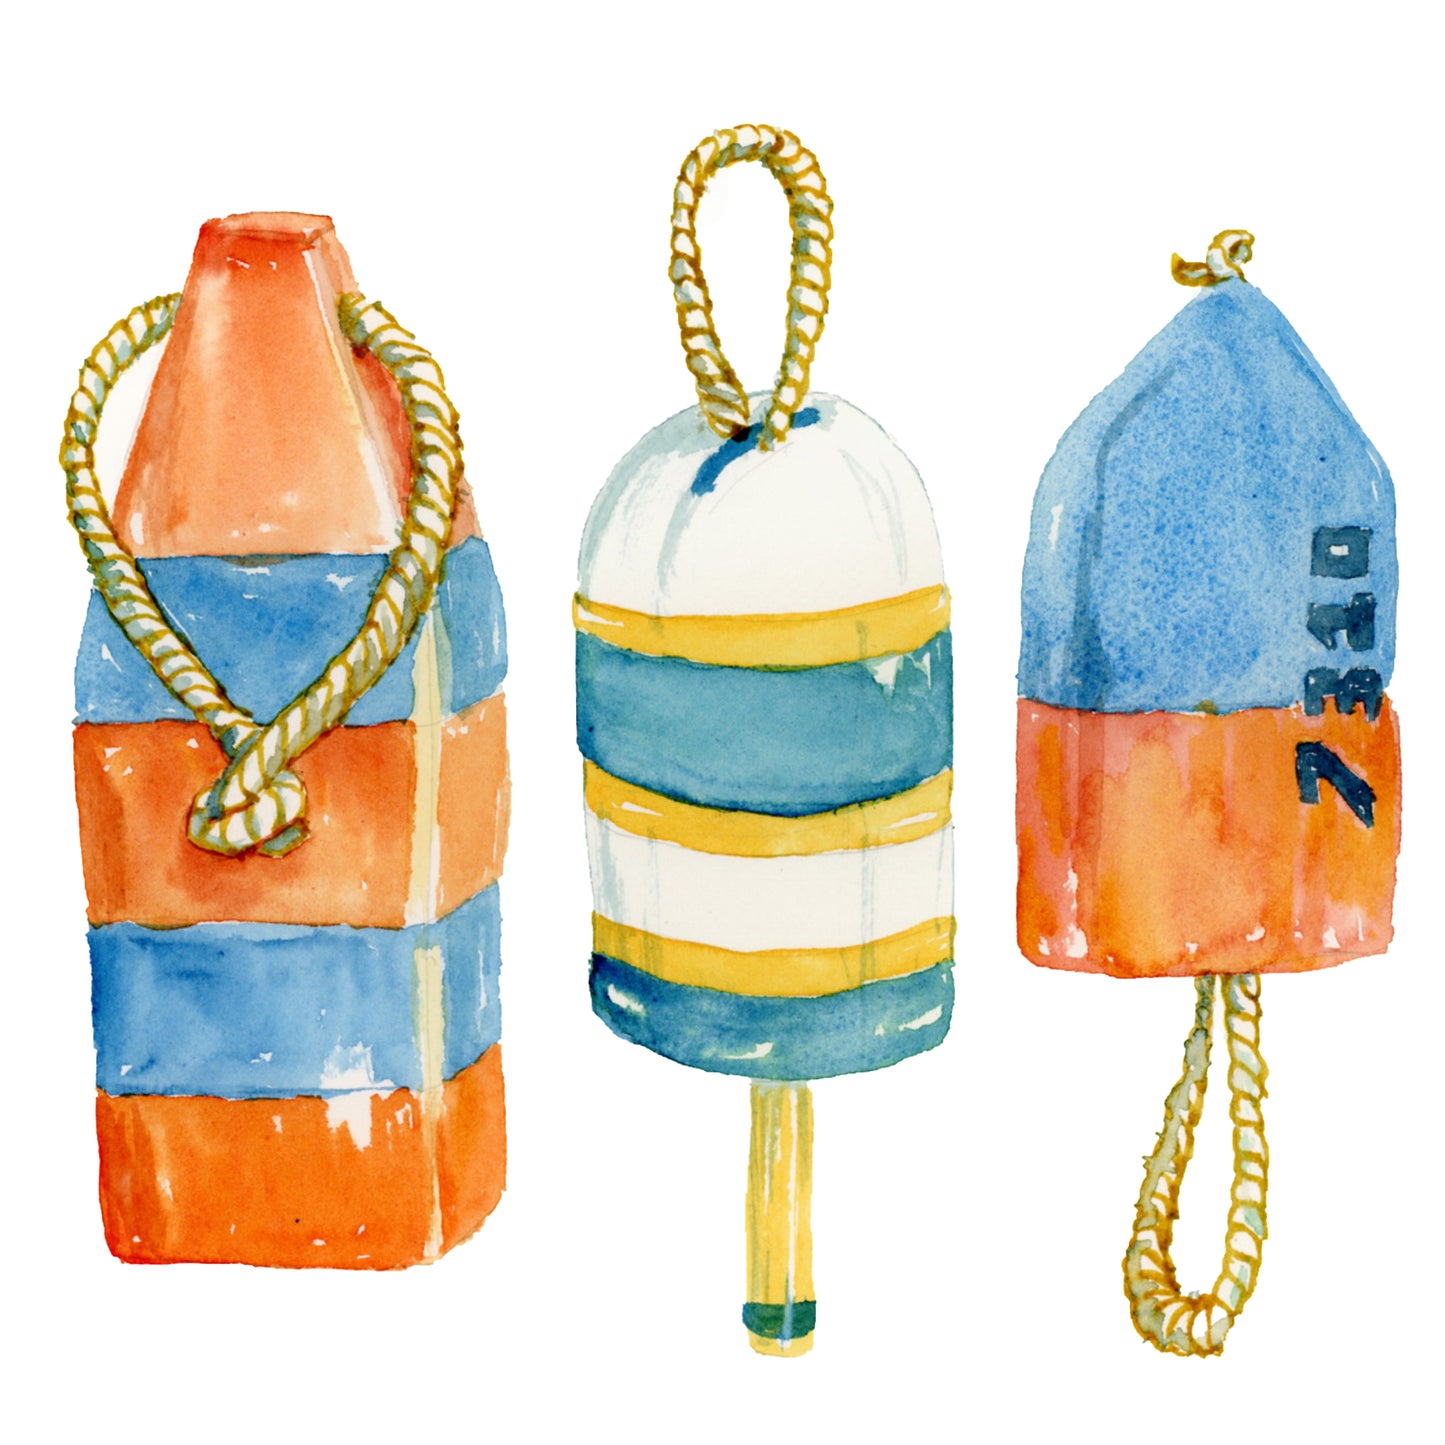 Buoys Watercolor Print on Wood Block - Flamingo Shores - Original Art for Home Decor and Gifts